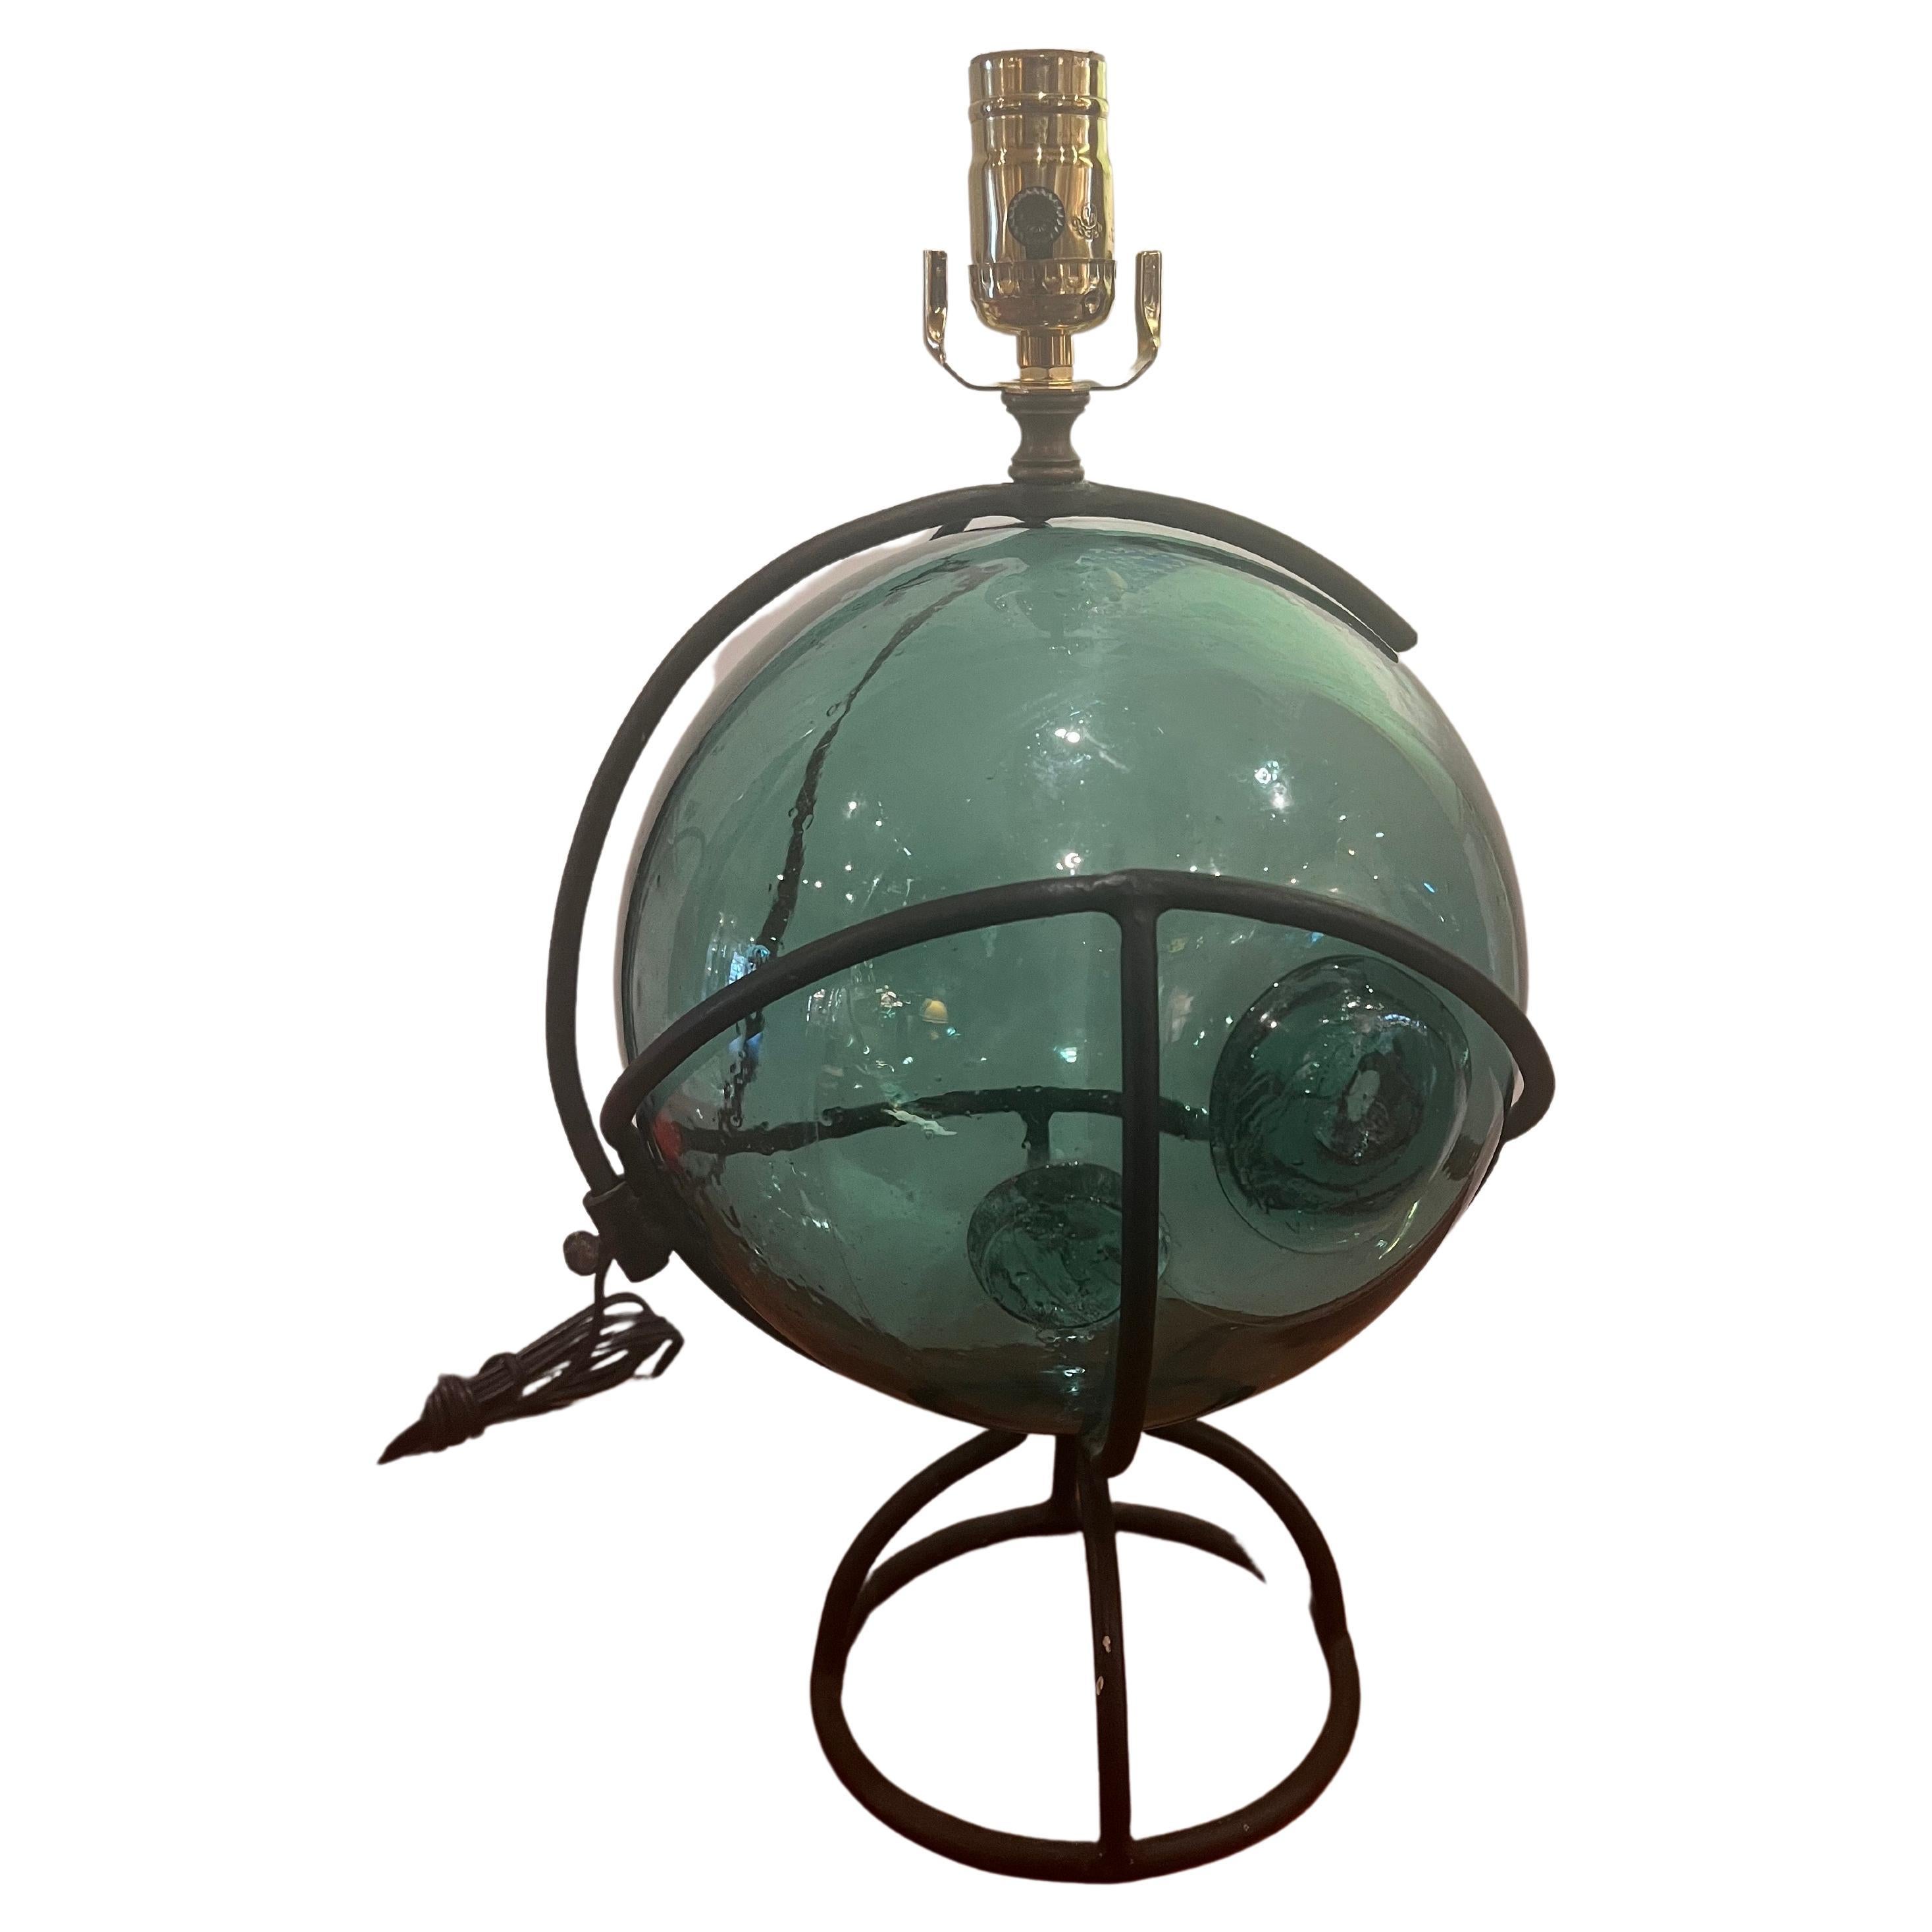 Beautiful and very rare Japanese fishing blown glass ball with special iron frame, freshly rewired new socket and cord lampshade not included it's 18 inches tall to the top of the socket.